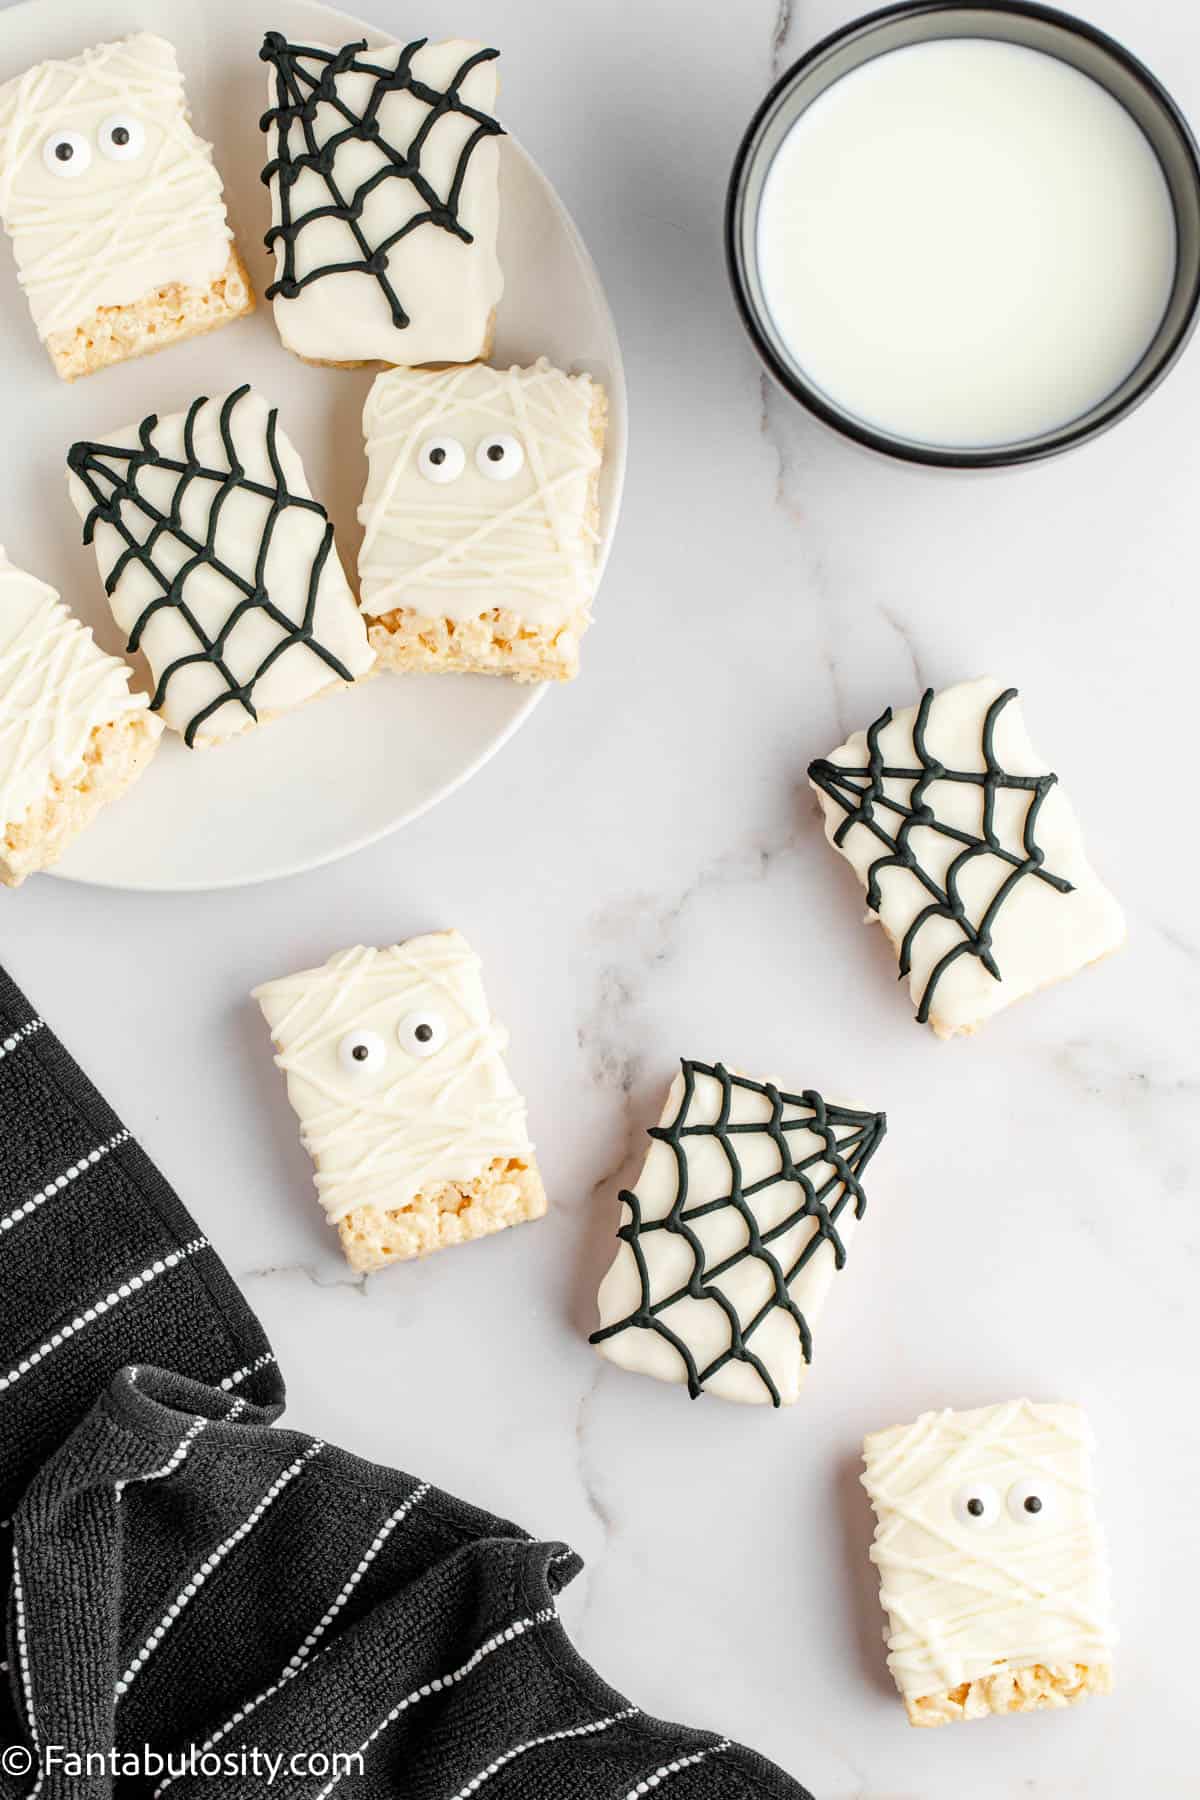 Rice krispie treats decorated to look like mummies and spider webs are displayed on a marble surface accented by a black and white towel